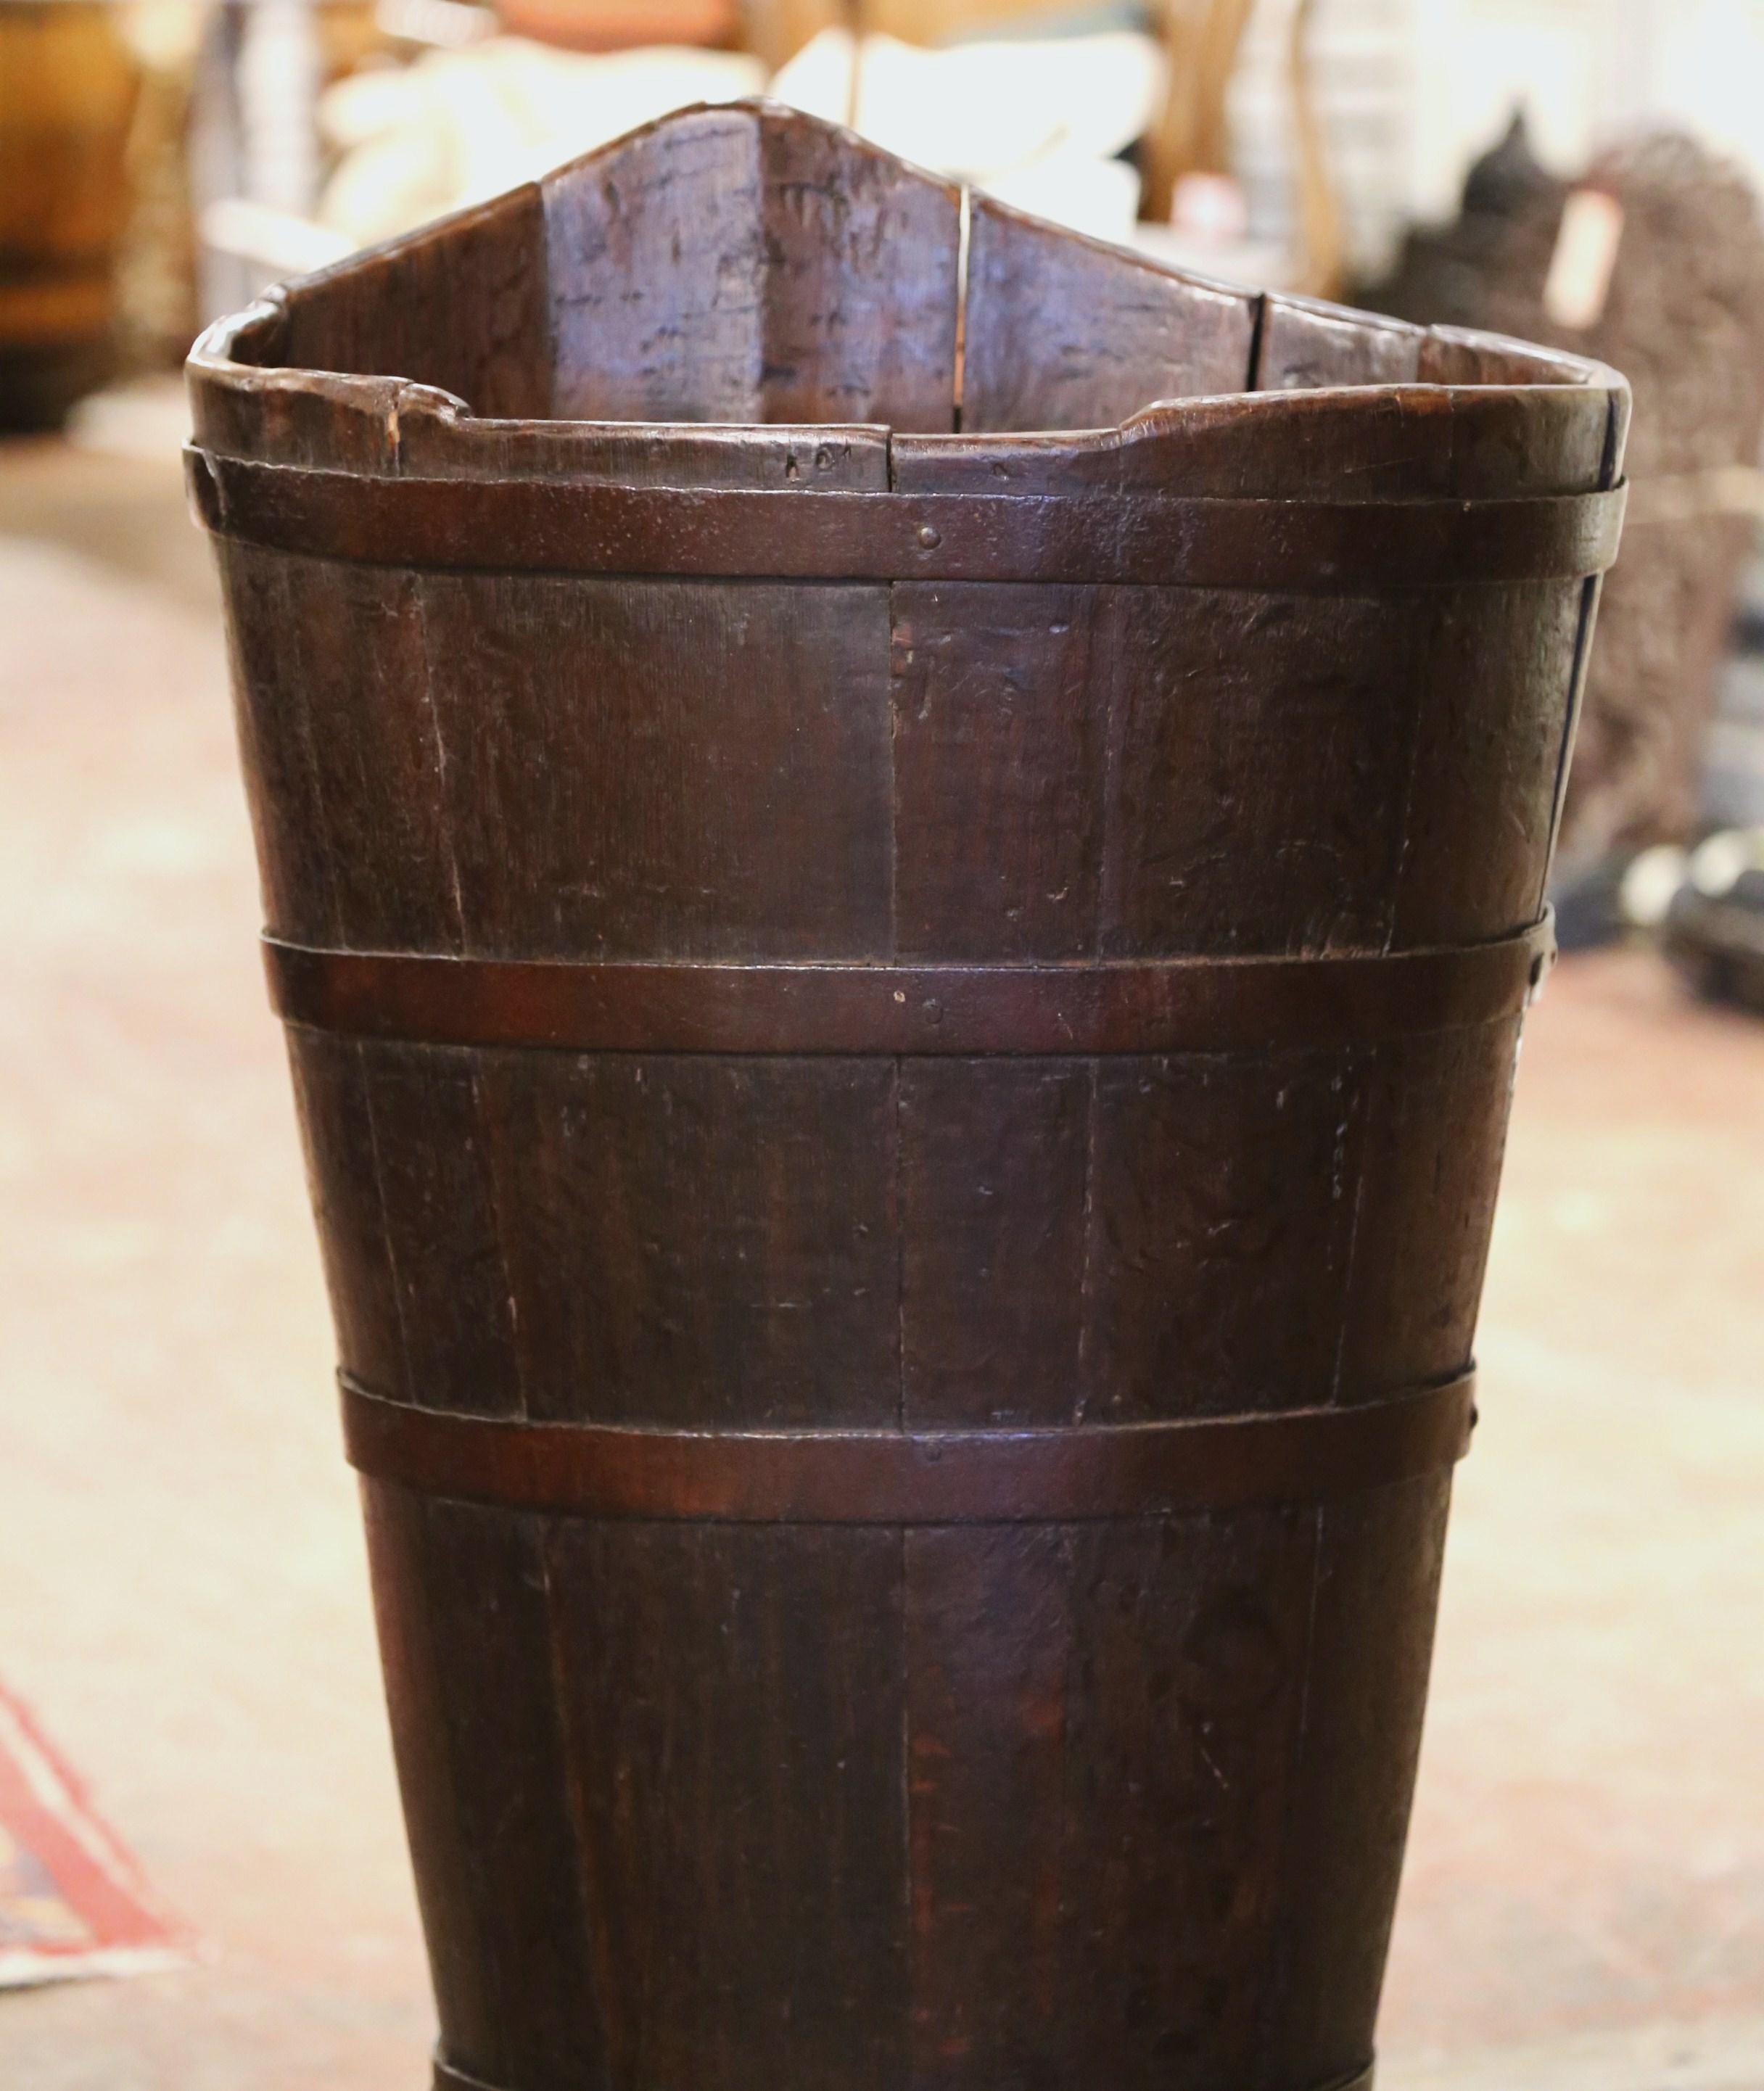 Decorate a wine cellar or breakfast room with this elegant antique grape harvest basket. Created in Burgundy, France circa 1880, the tall tapered basket with metal strapping is decorated with brackets for leather back straps, so that it can be